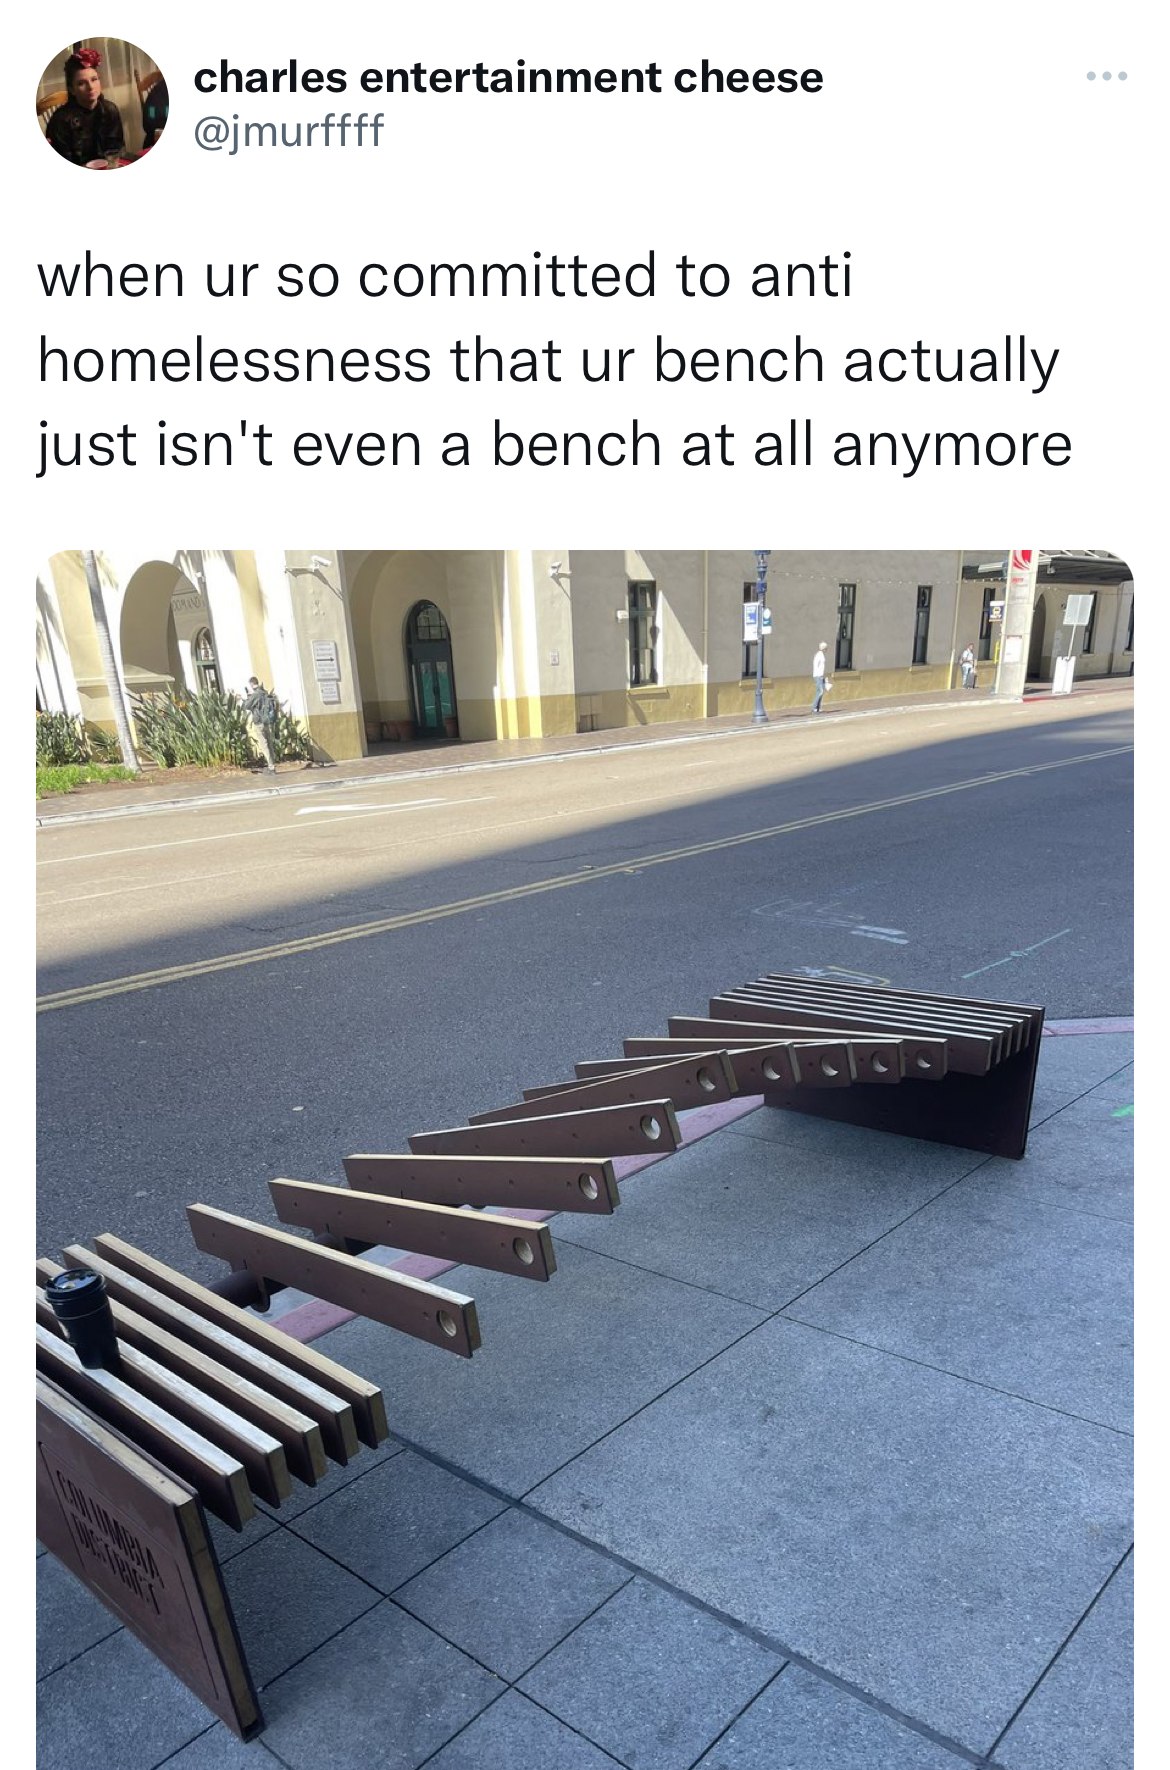 savage and absurd tweets - bench - charles entertainment cheese when ur so committed to anti homelessness that ur bench actually just isn't even a bench at all anymore Wind